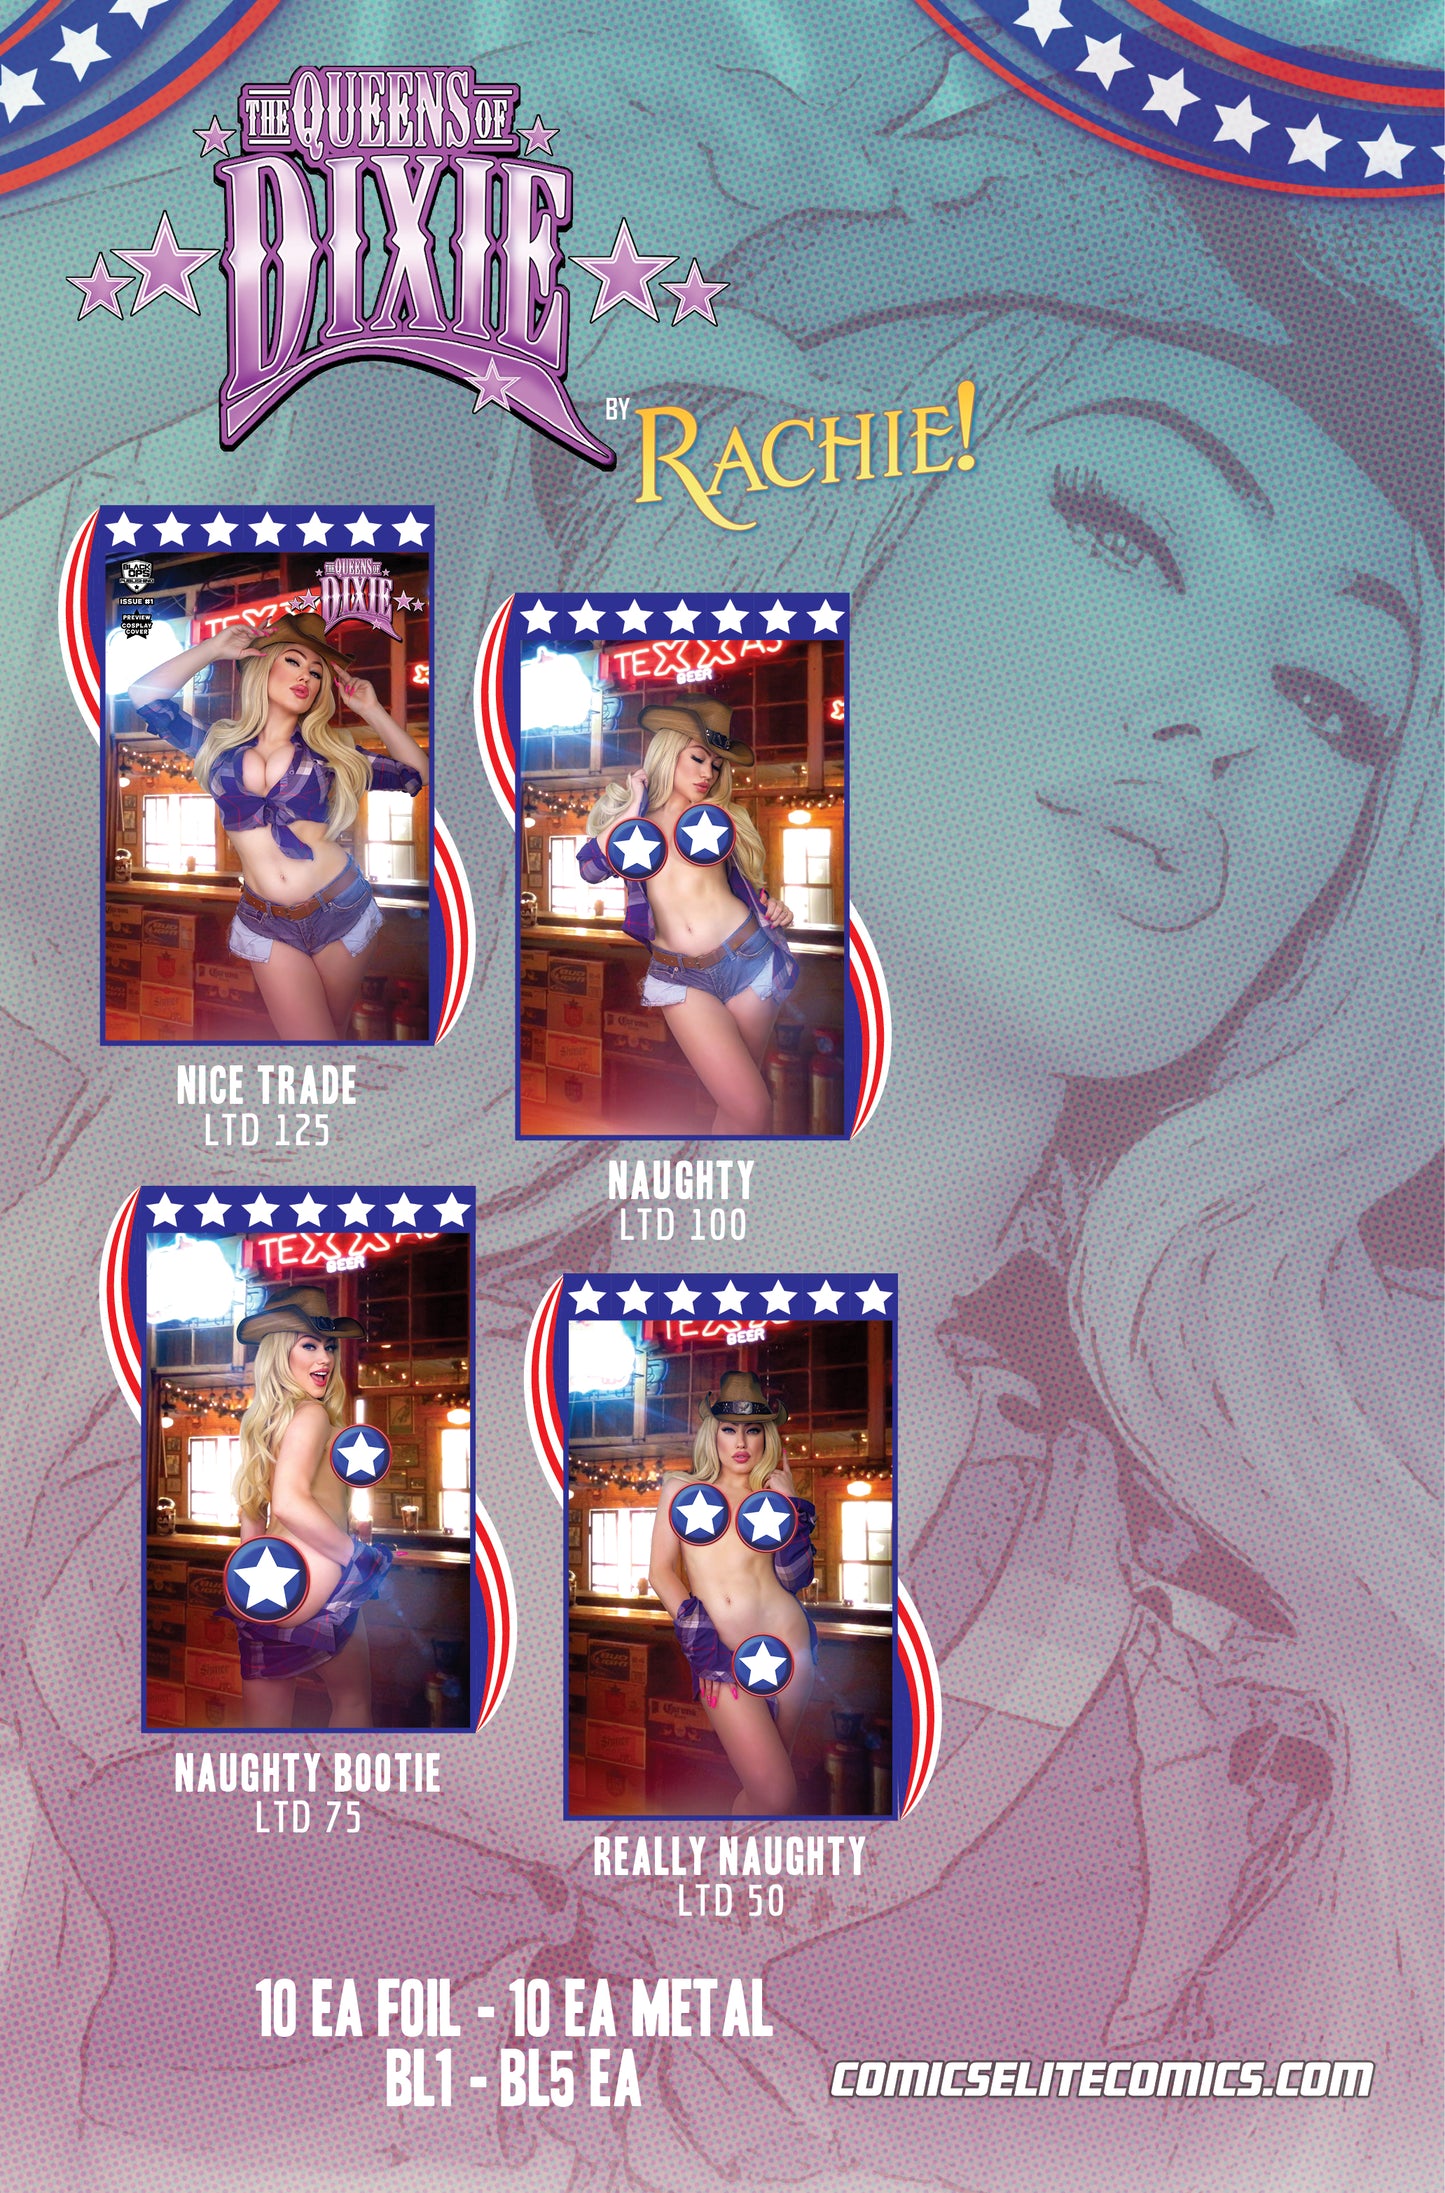 SIGNED W/ COA - QUEENS OF DIXIE #1 PREVIEW - FACES BY RACHIE - NAUGHTY LTD 100